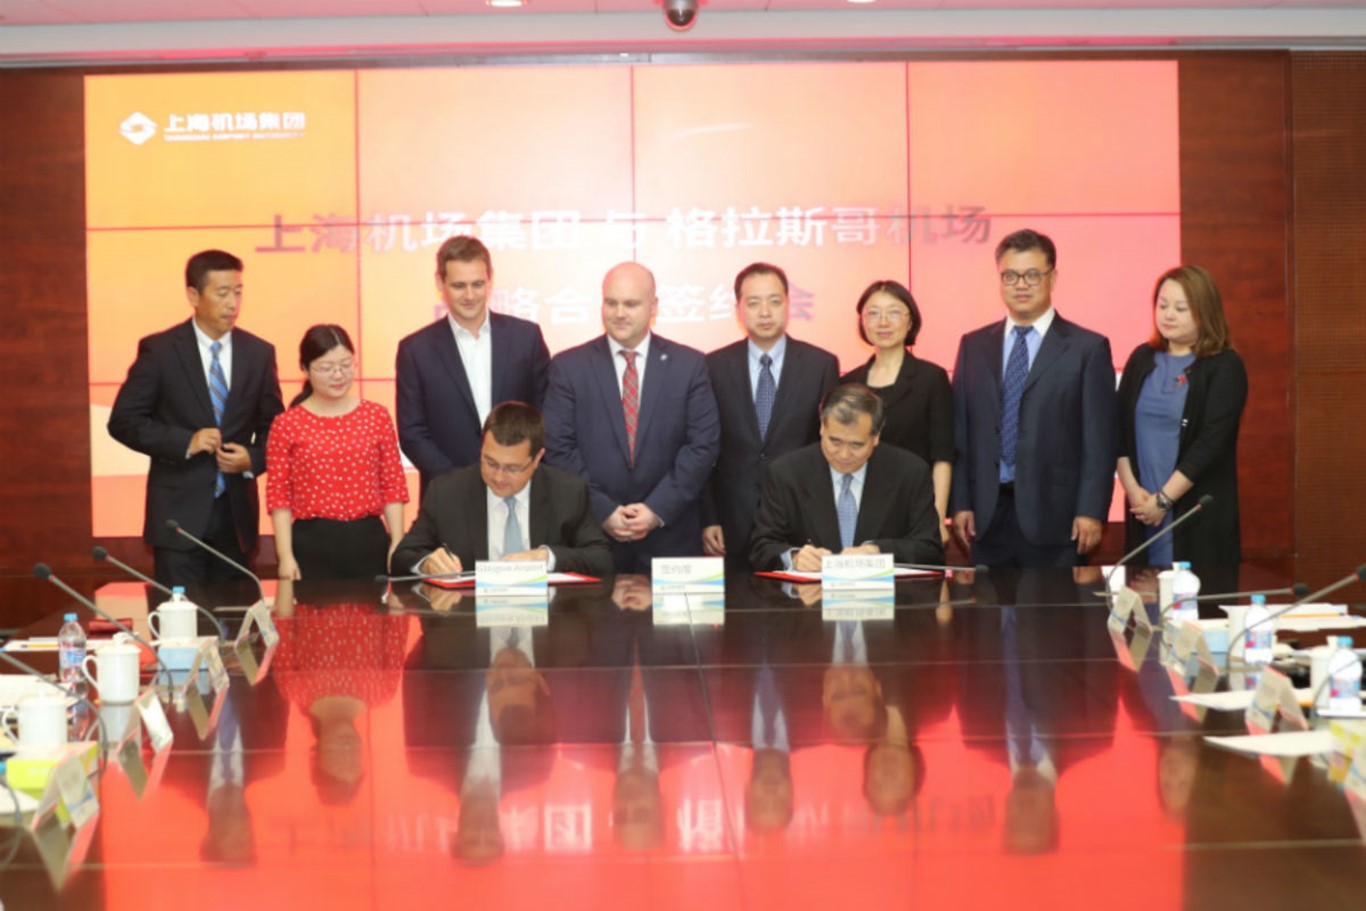 Glasgow Airport and Shanghai Airport Authority form alliance to grow visitor numbers between China and Scotland